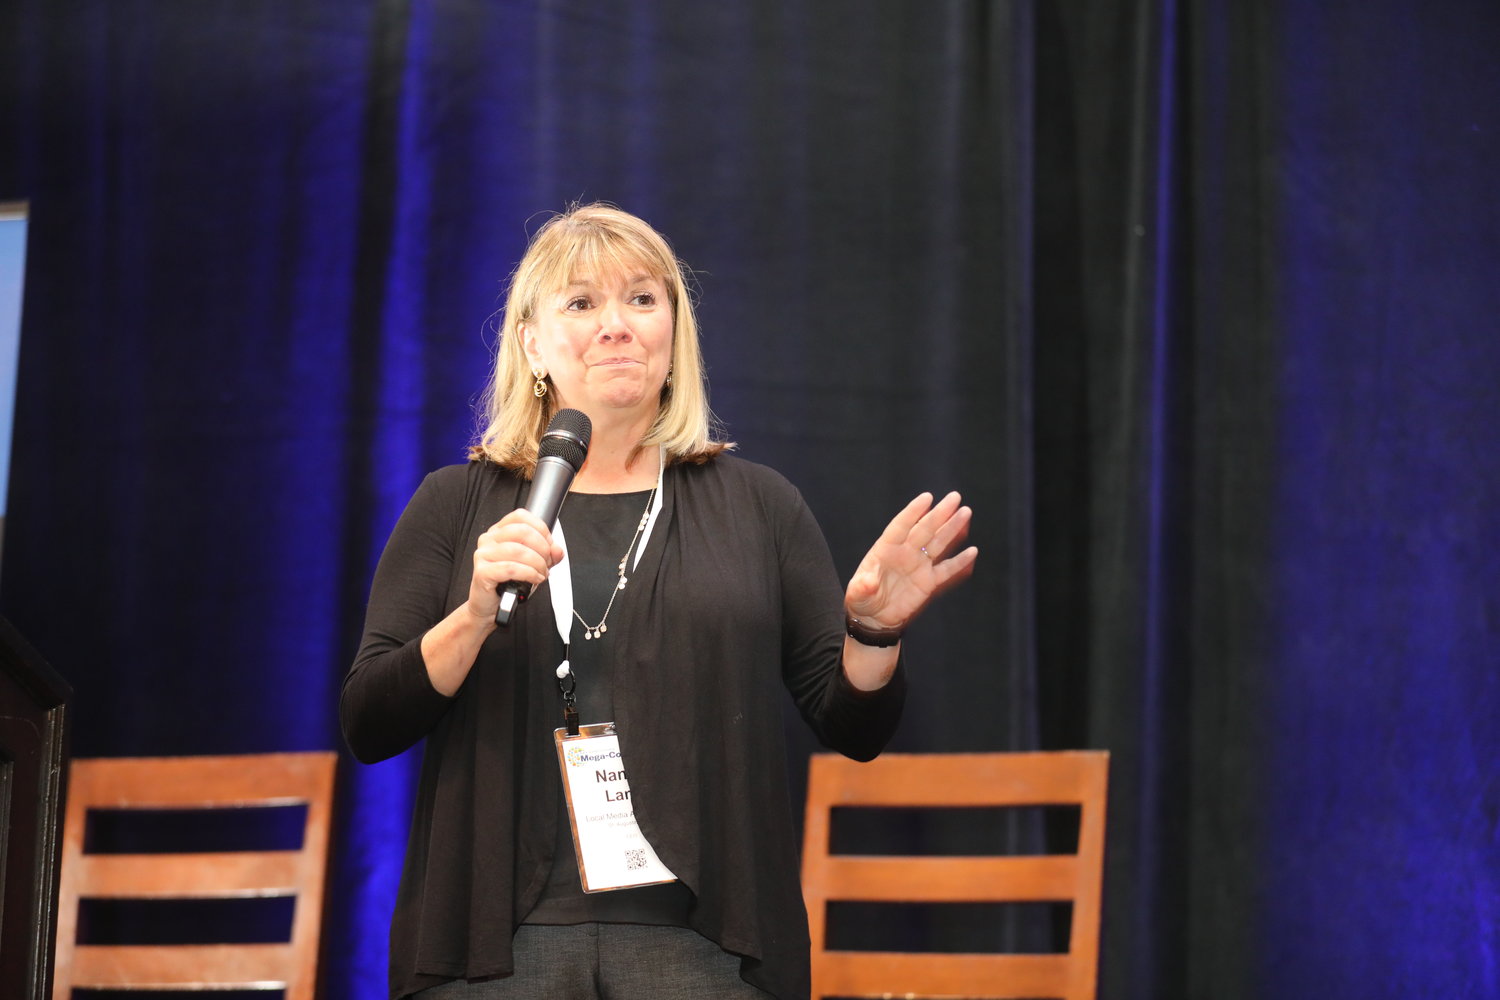 Nancy Lane, CEO of Local Media Association, at the 2020 Mega-Conference. (Photo by Bob Booth)